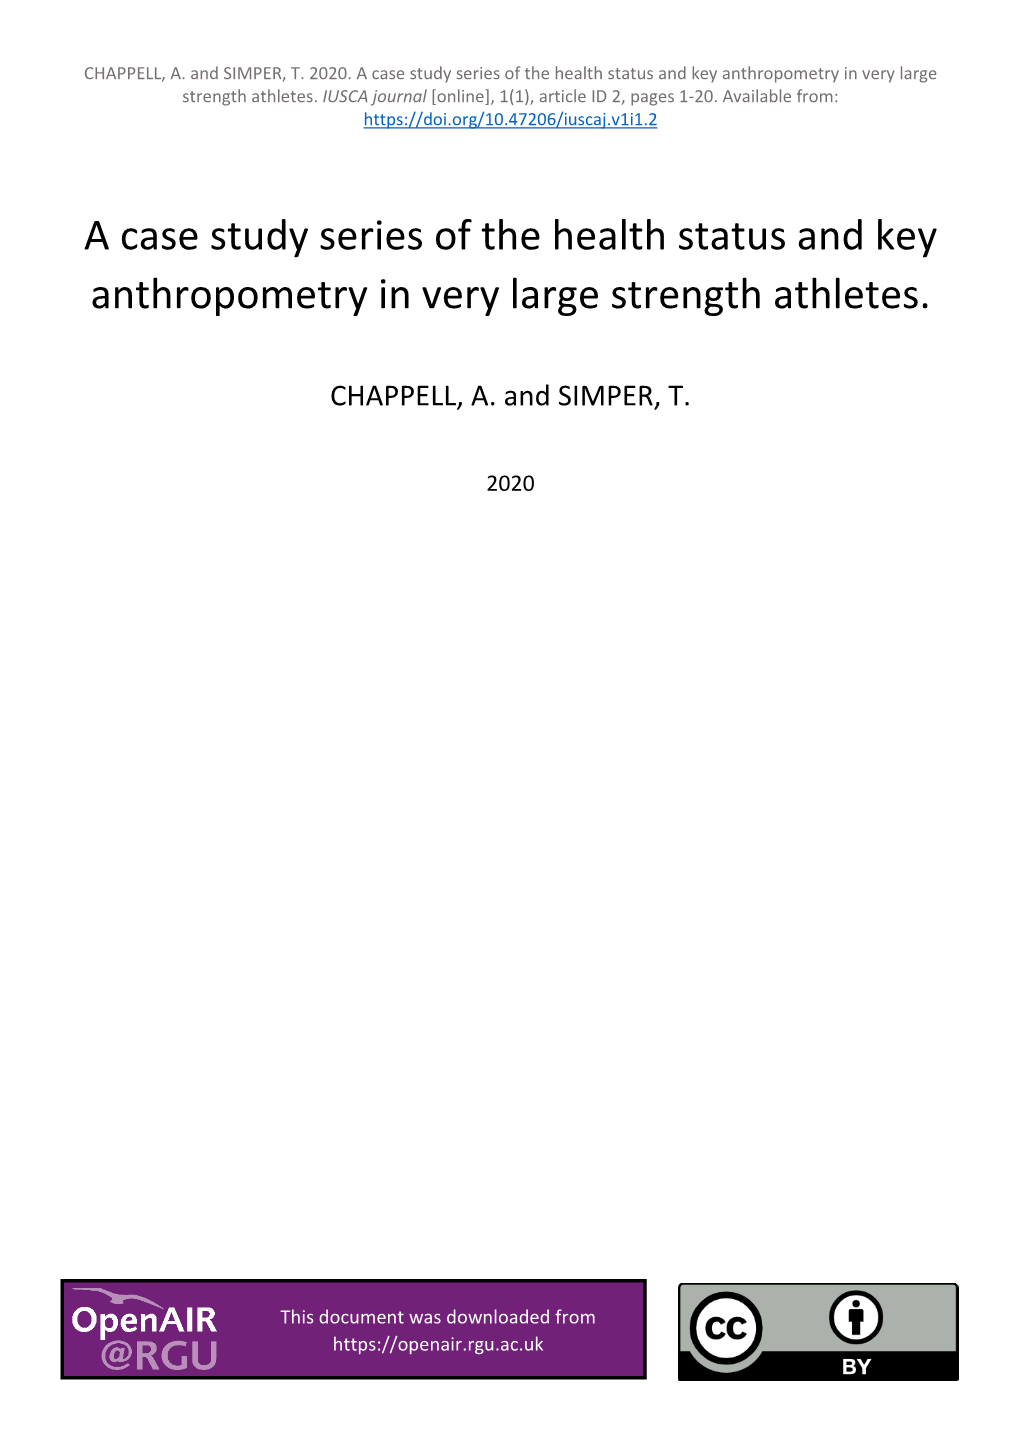 A Case Study Series of the Health Status and Key Anthropometry in Very Large Strength Athletes